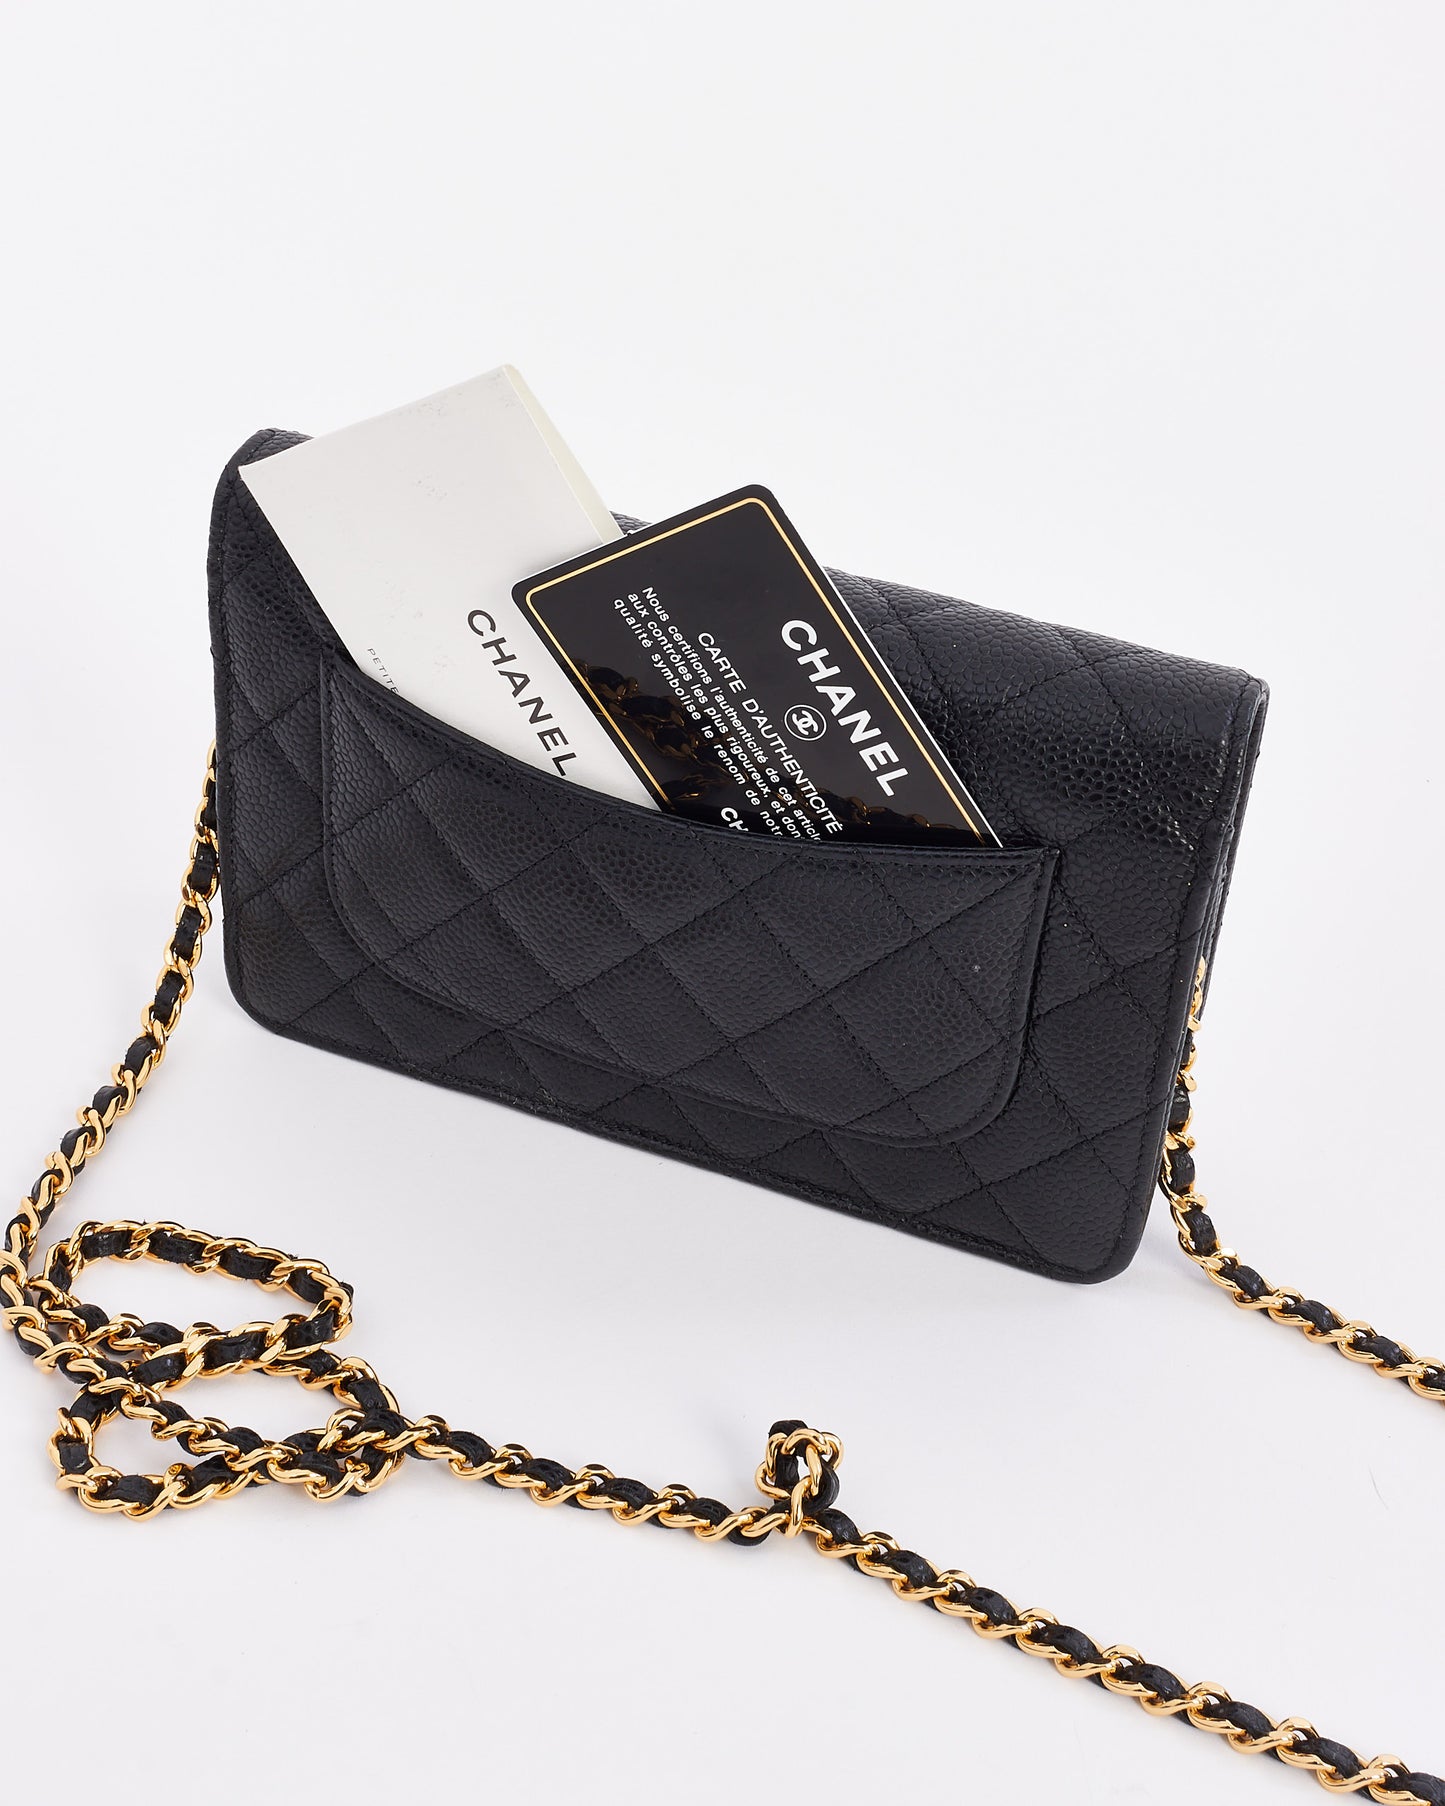 Chanel Black Caviar Leather with Gold Hardware Wallet on Chain